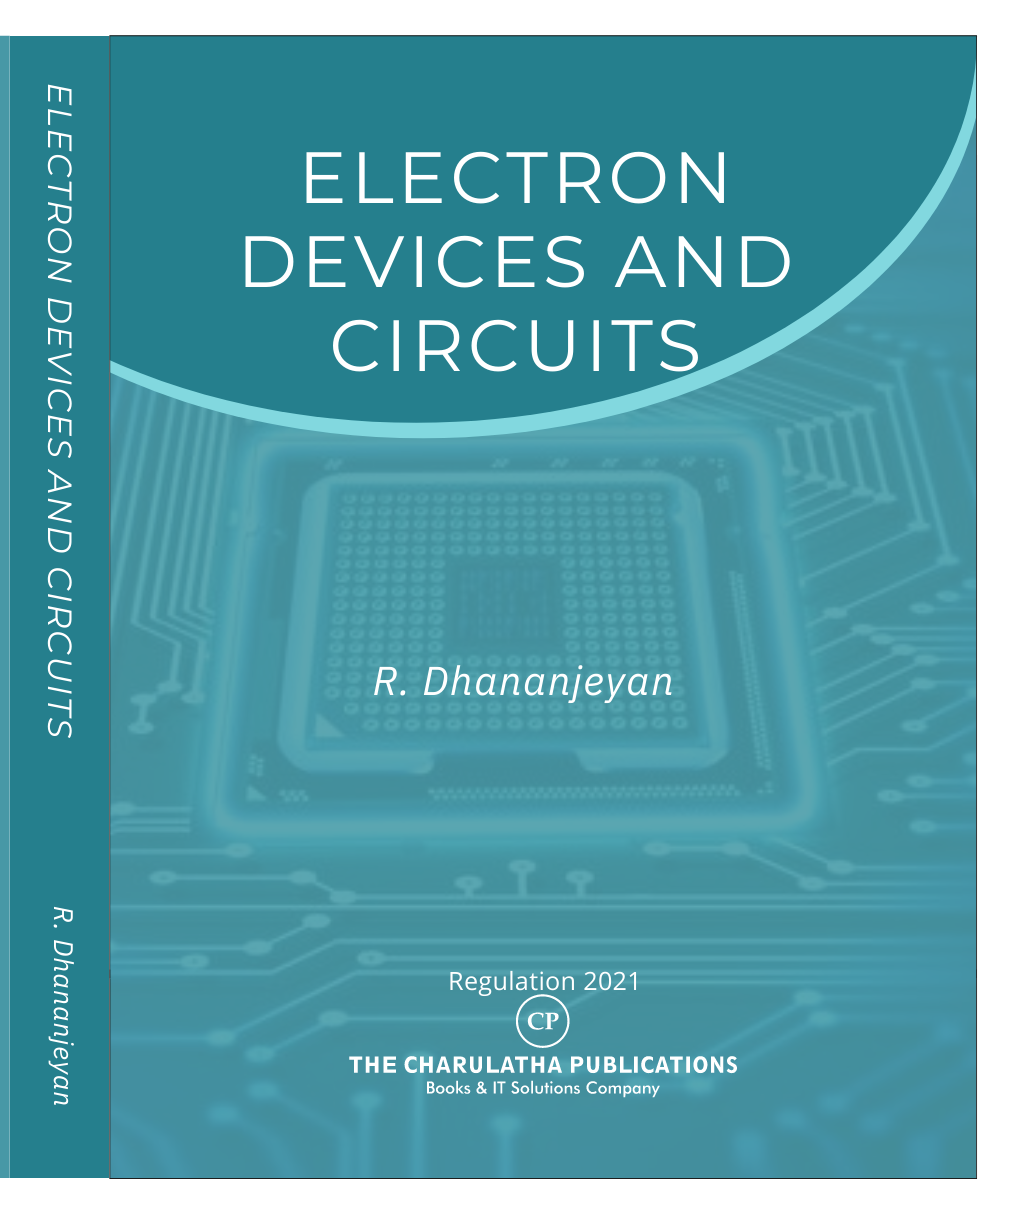 The charulatha publications electron devices and circuits